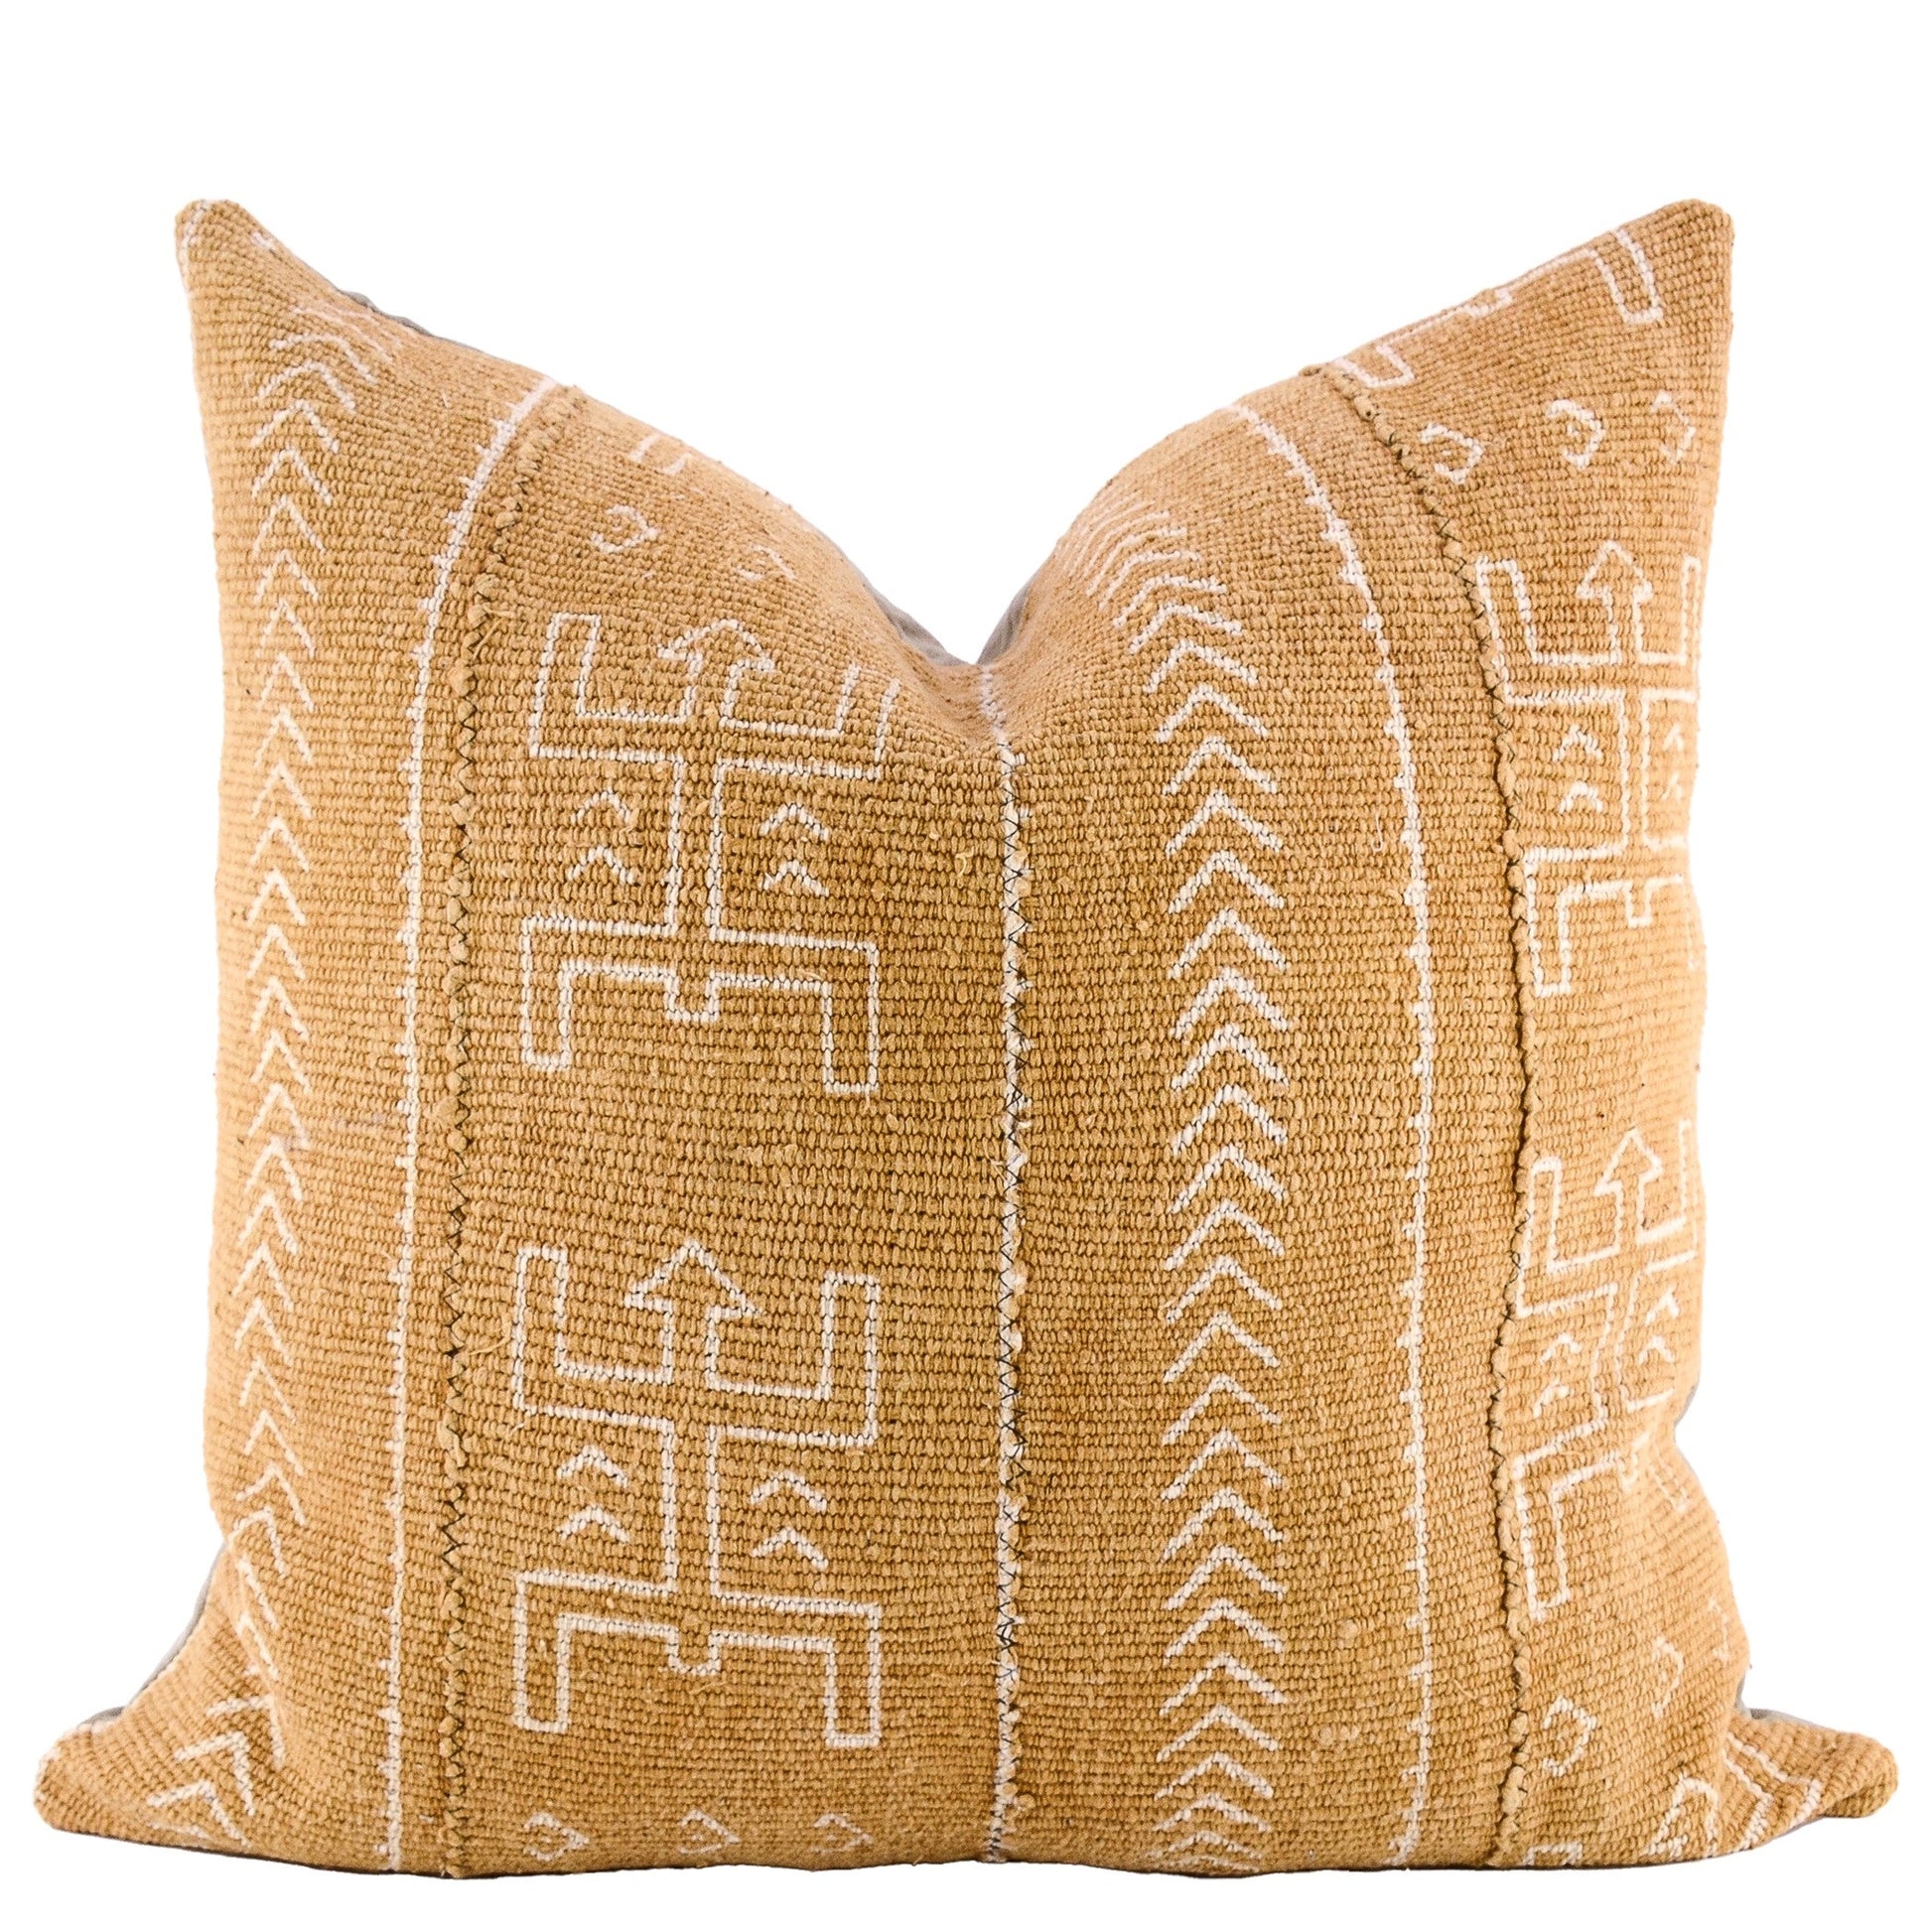 Front of pillow with rich brown and white patterns made from a traditional handwoven mudcloth textile sheet from Mali West Africa